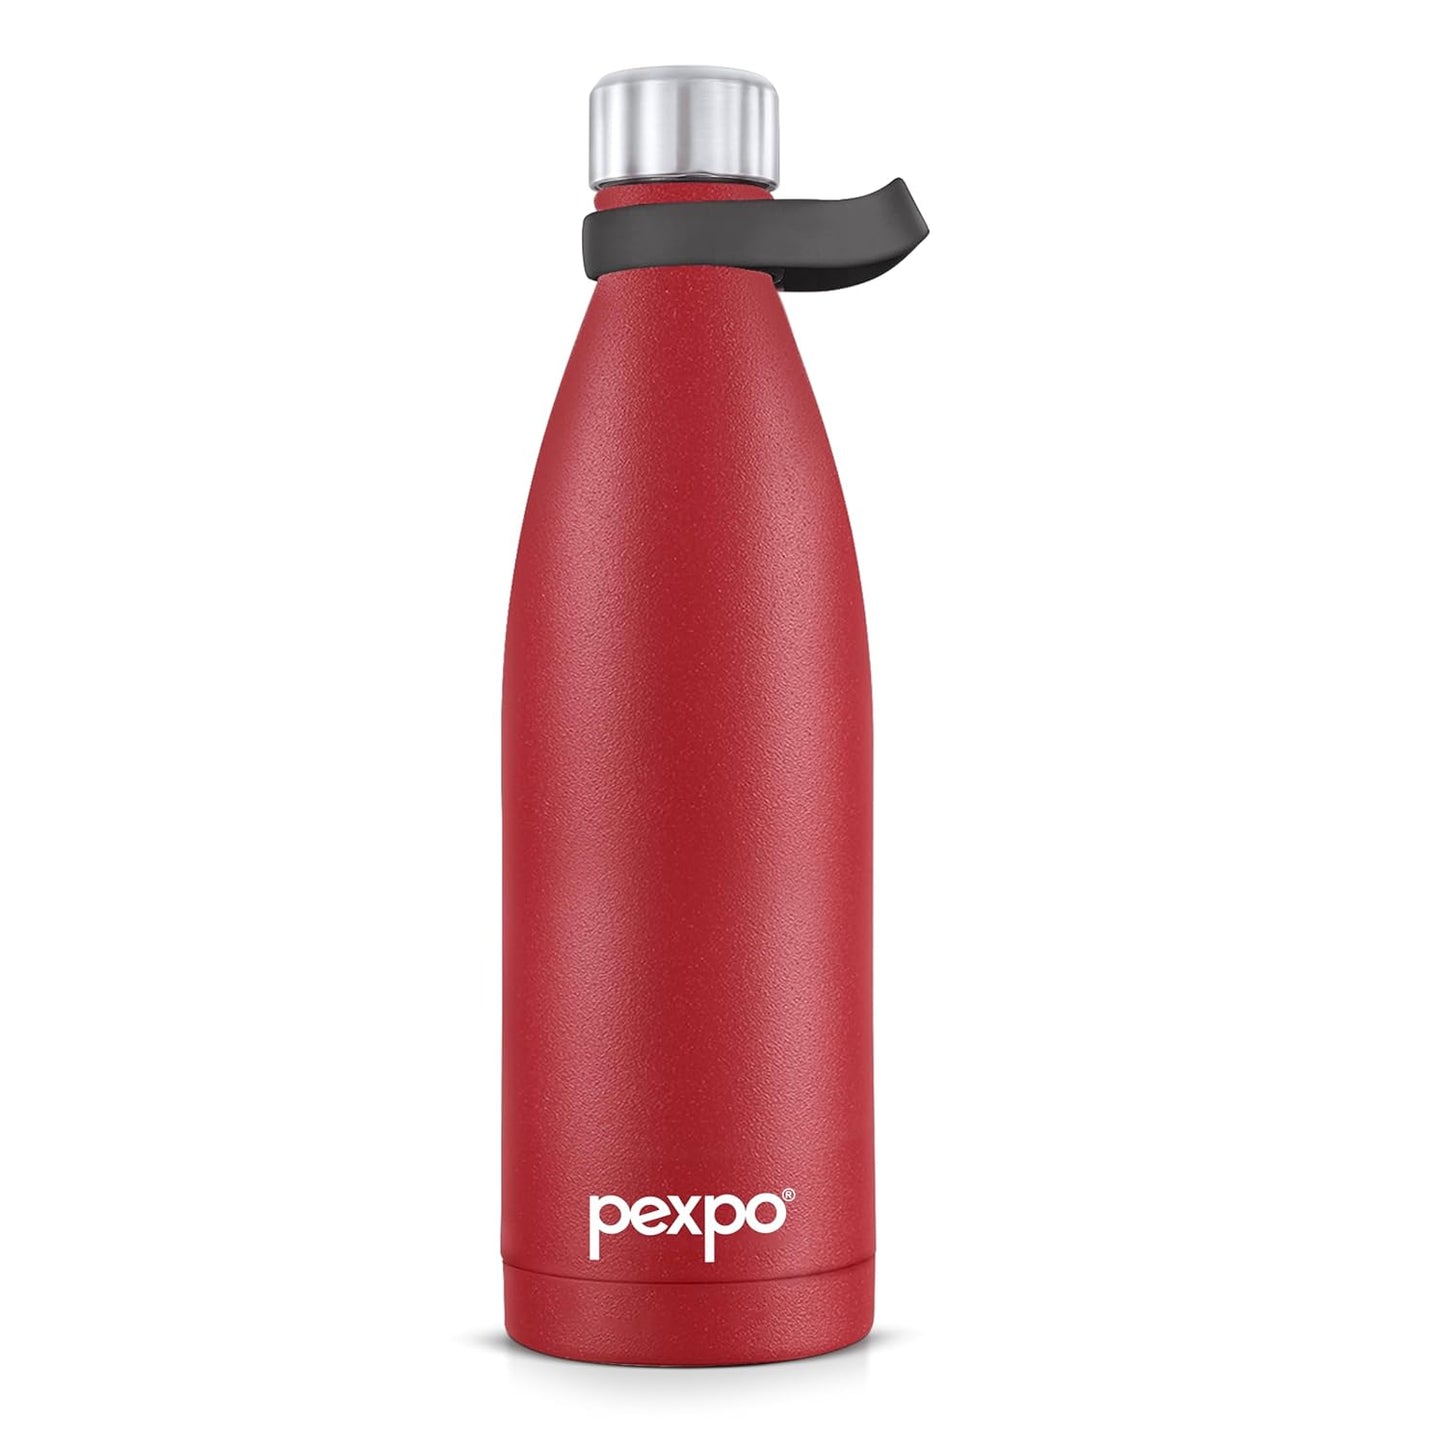 Pexpo Evok - Stainless Steel Vacuum Insulated Leak Proof Water Bottle | 24/7 Hot & Cold | ISI Certified